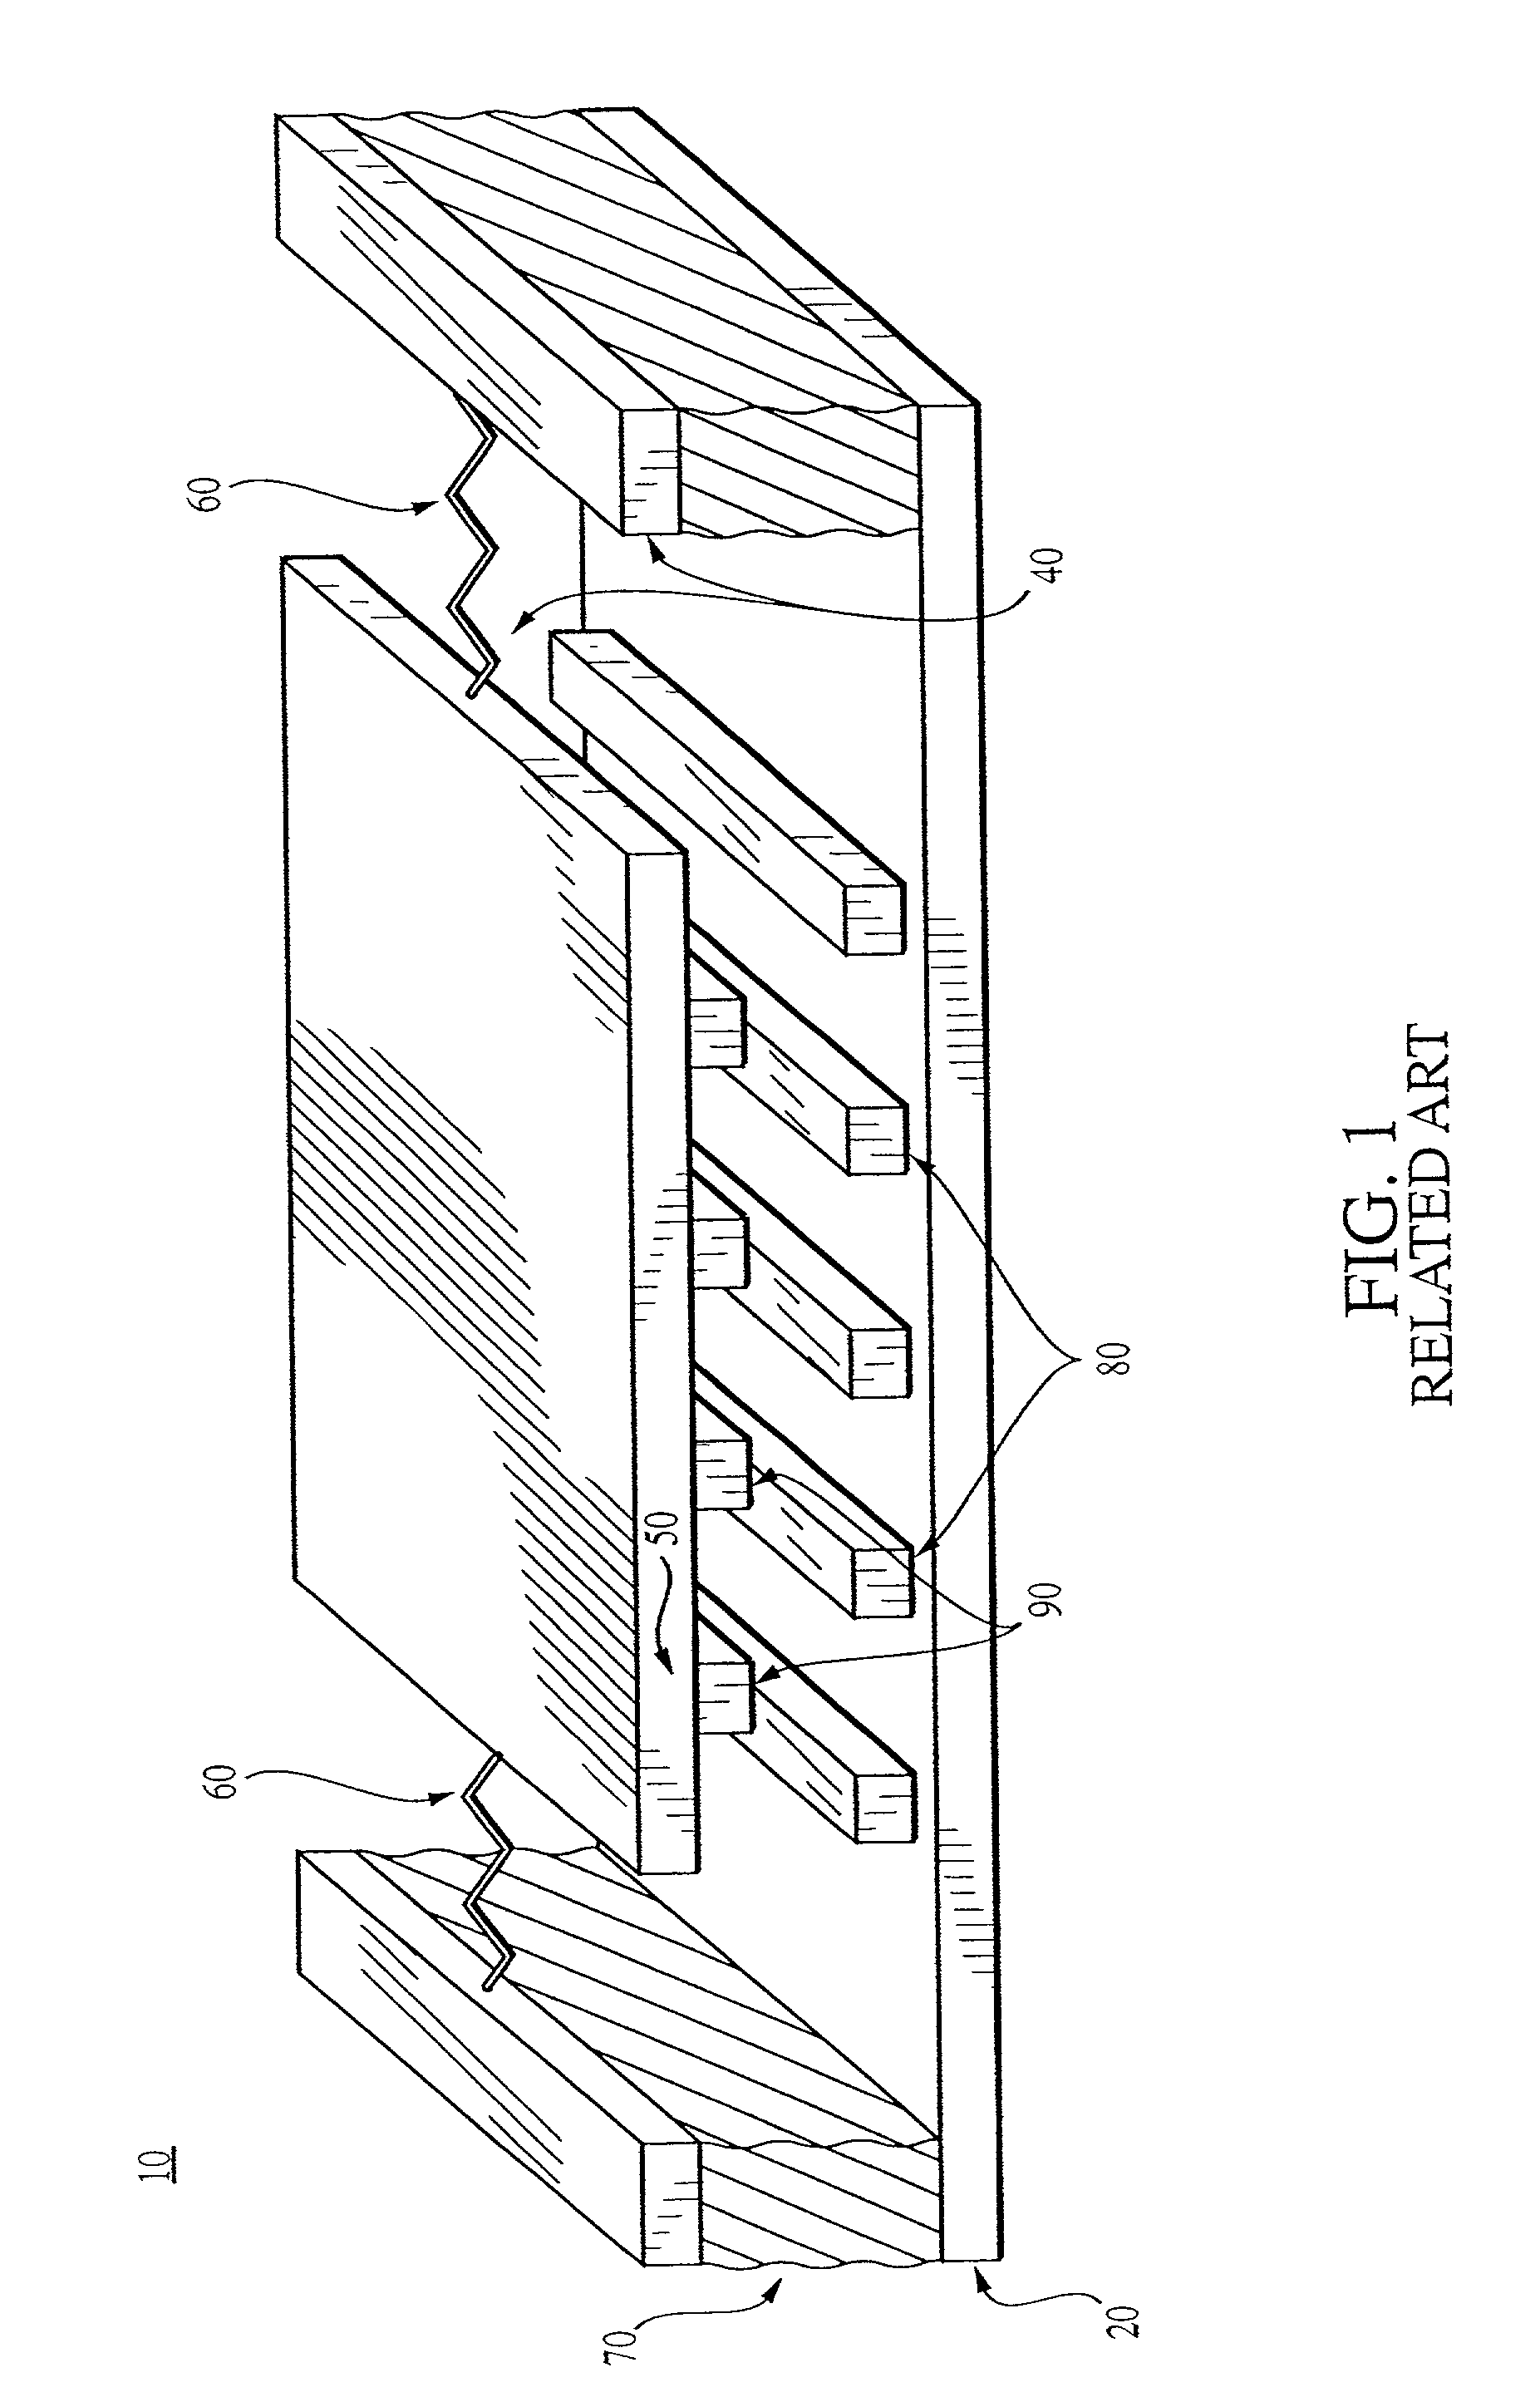 Use of standoffs to protect atomic resolution storage mover for out-of-plane motion